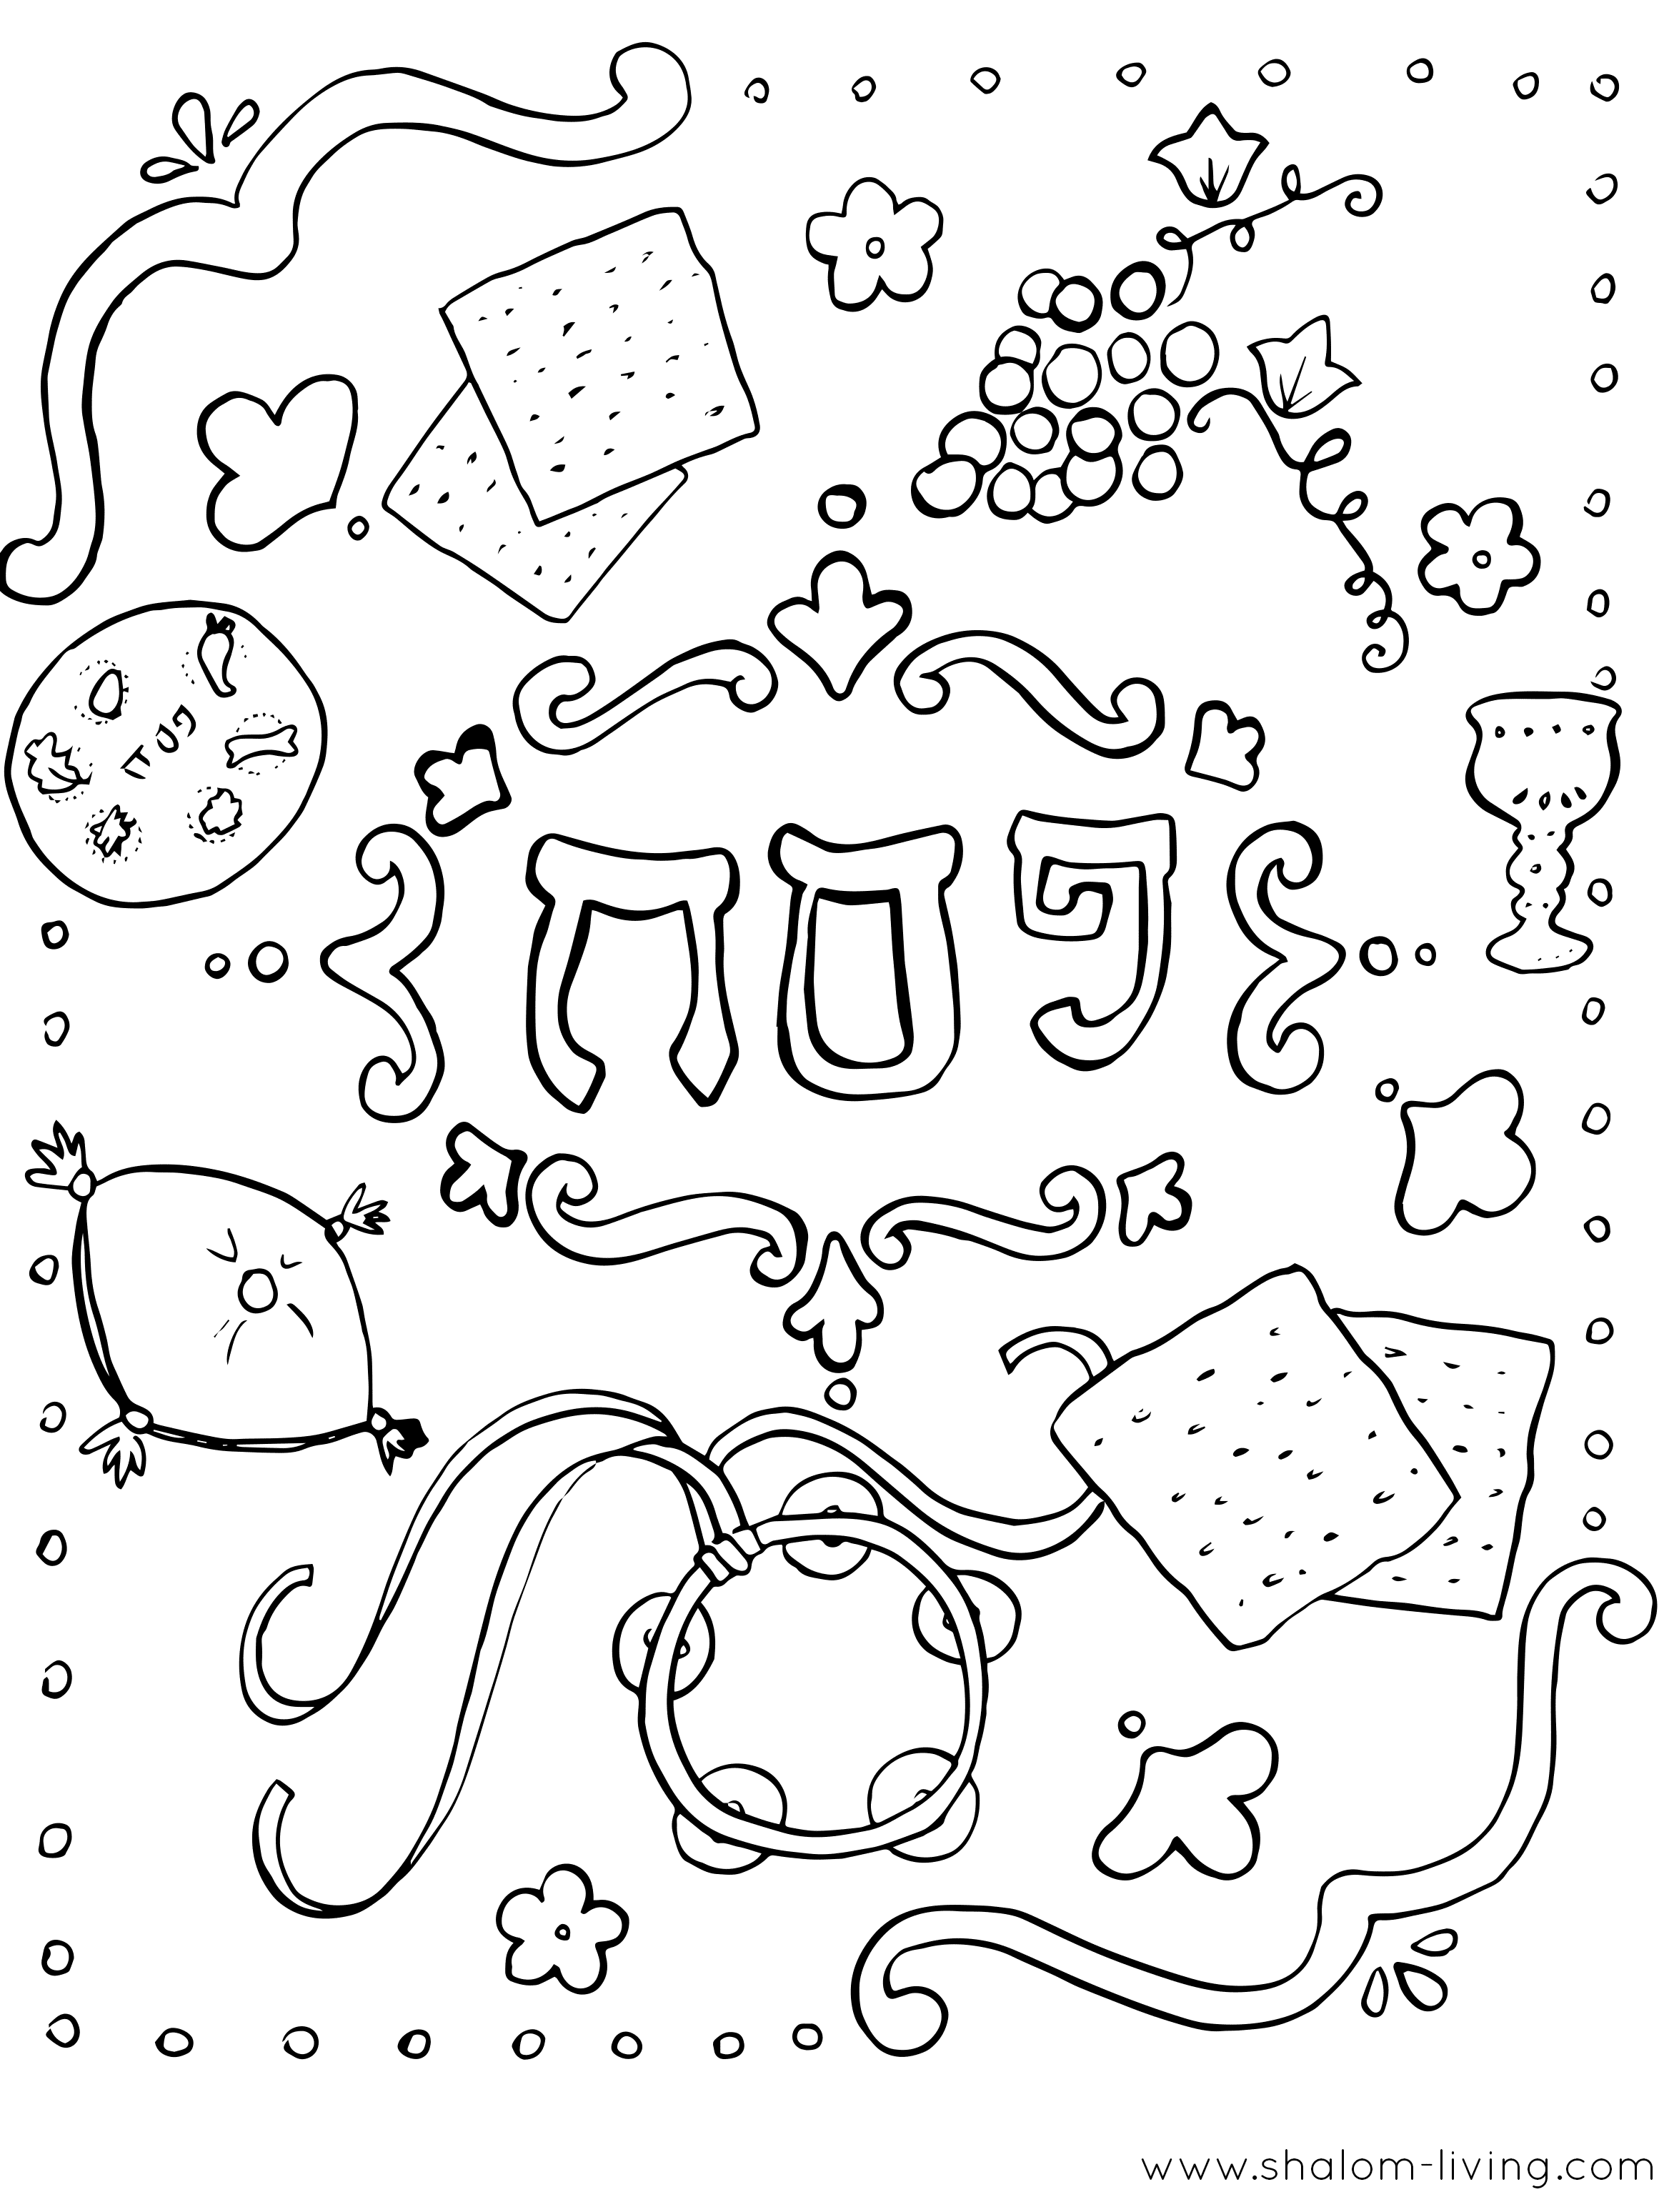 Passover Coloring Pages   Coloring Pages For Kids And Adults